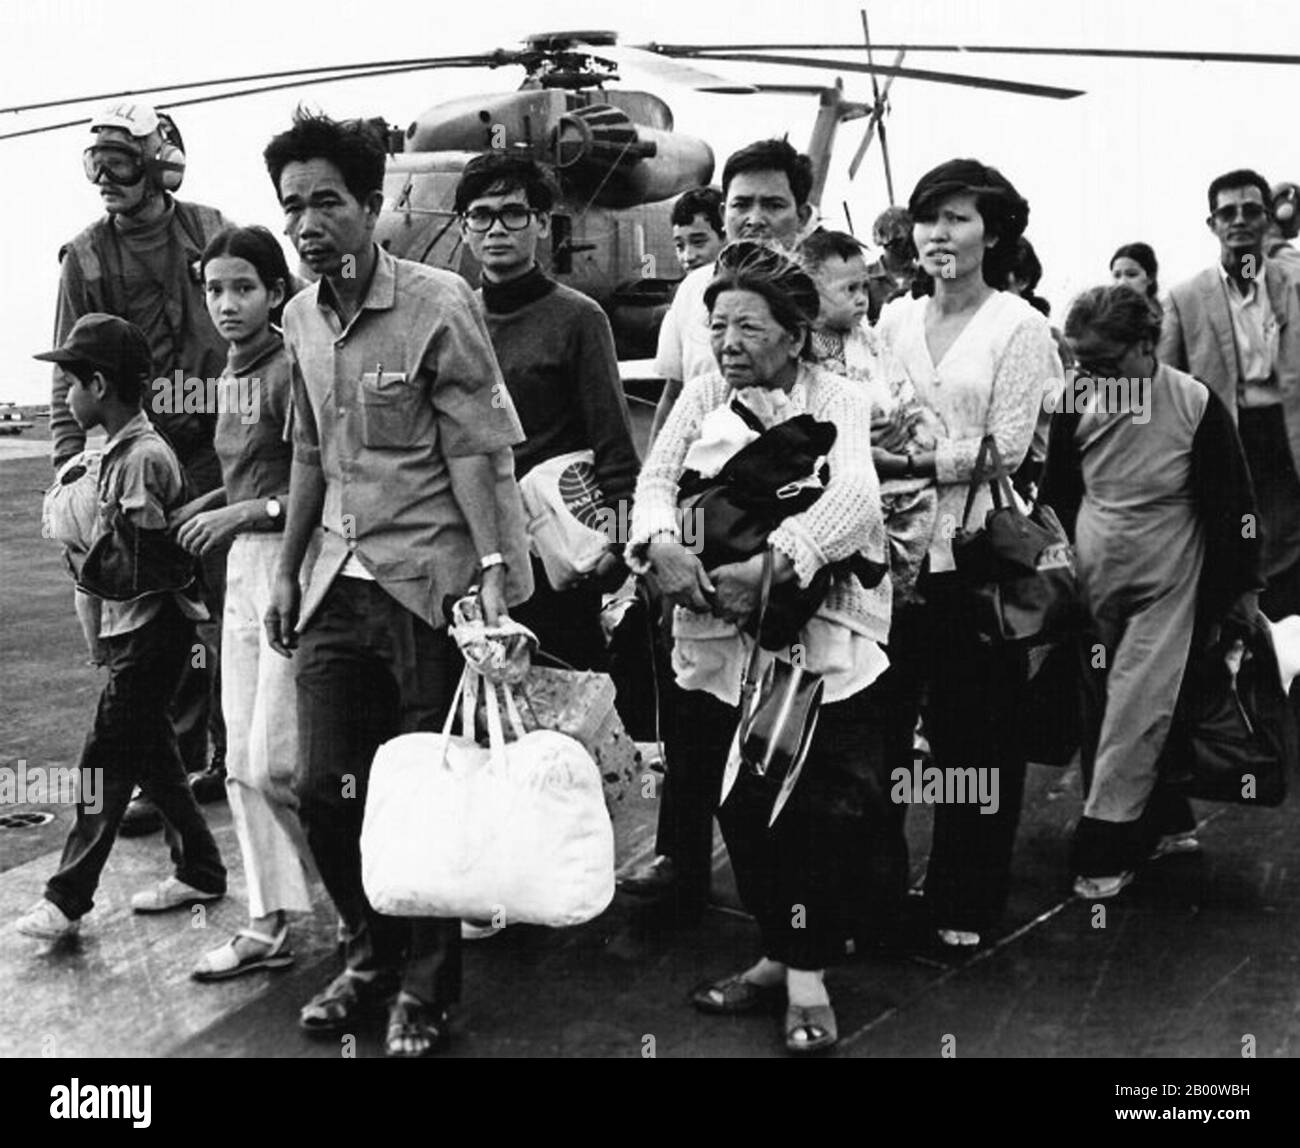 Vietnam: South Vietnamese refugees fleeing the communist conquest of Saigon in 1975 arrive at Camp Foster, Okinawa, Japan.  South Vietnamese refugees walk across a U.S. Navy vessel. Operation Frequent Wind, the final operation in Saigon, began April 29, 1975. During a nearly constant barrage of explosions, the Marines loaded American and Vietnamese civilians, who feared for their lives, onto helicopters that brought them to waiting aircraft carriers. The Navy vessels brought them to the Philippines and eventually to Camp Pendleton, California. (Official U.S. Navy phot in Public Domain). Stock Photo